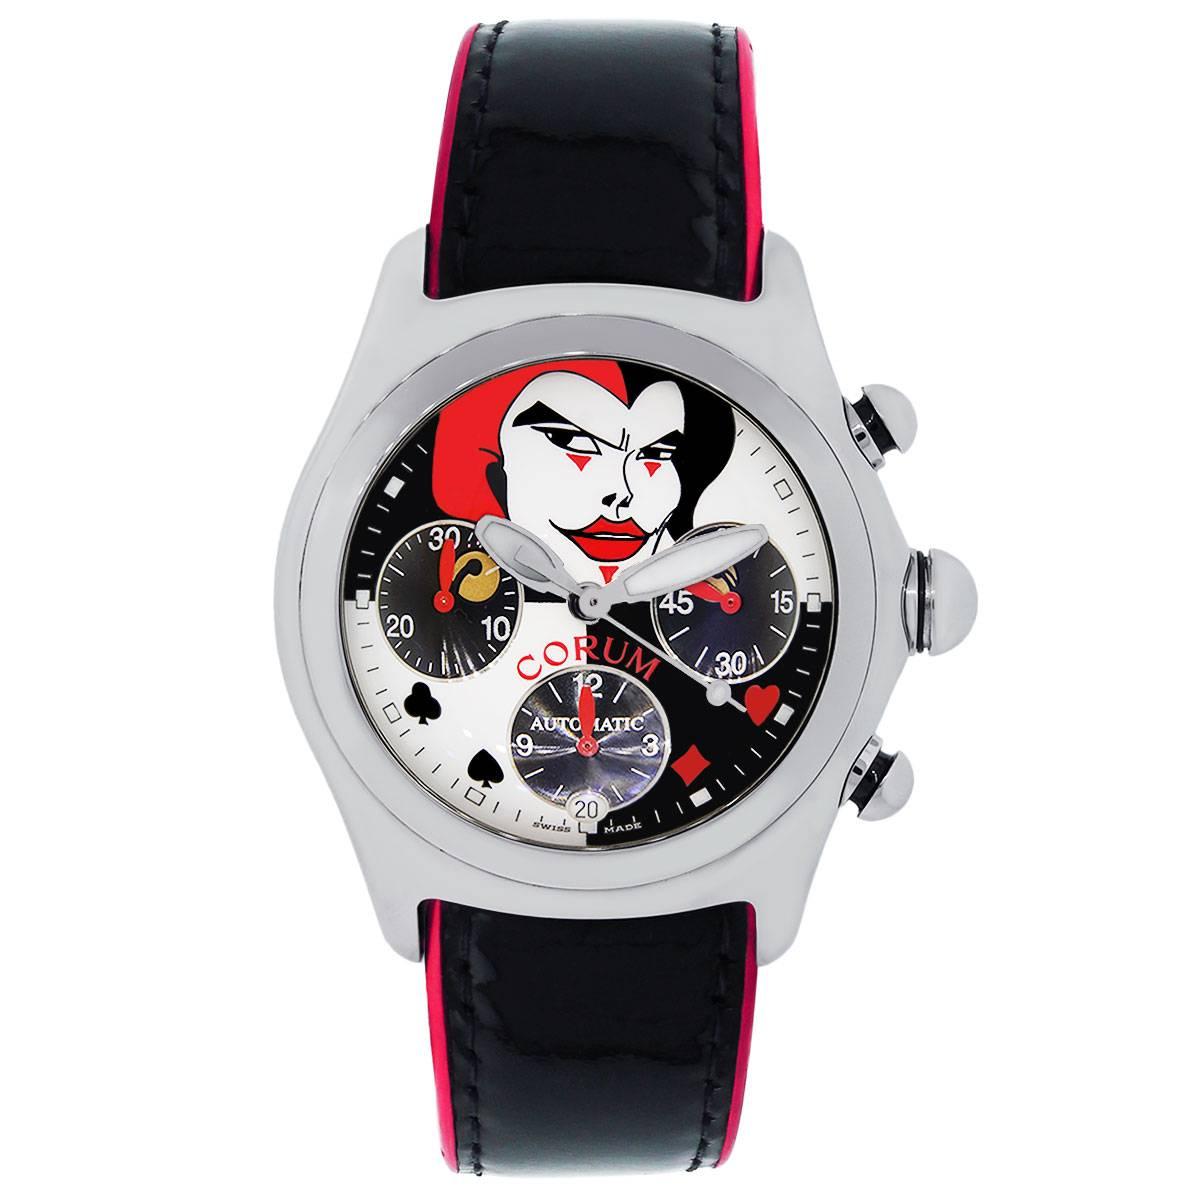 Brand: Corum
MPN: 285.240.20
Style: Joker limited edition
Case Material: Stainless steel
Case Diameter: 45mm
Crystal: Domed sapphire crystal
Bezel: Smooth fixed stainless steel bezel
Dial: Joker dial with luminescent hands, luminescent hour